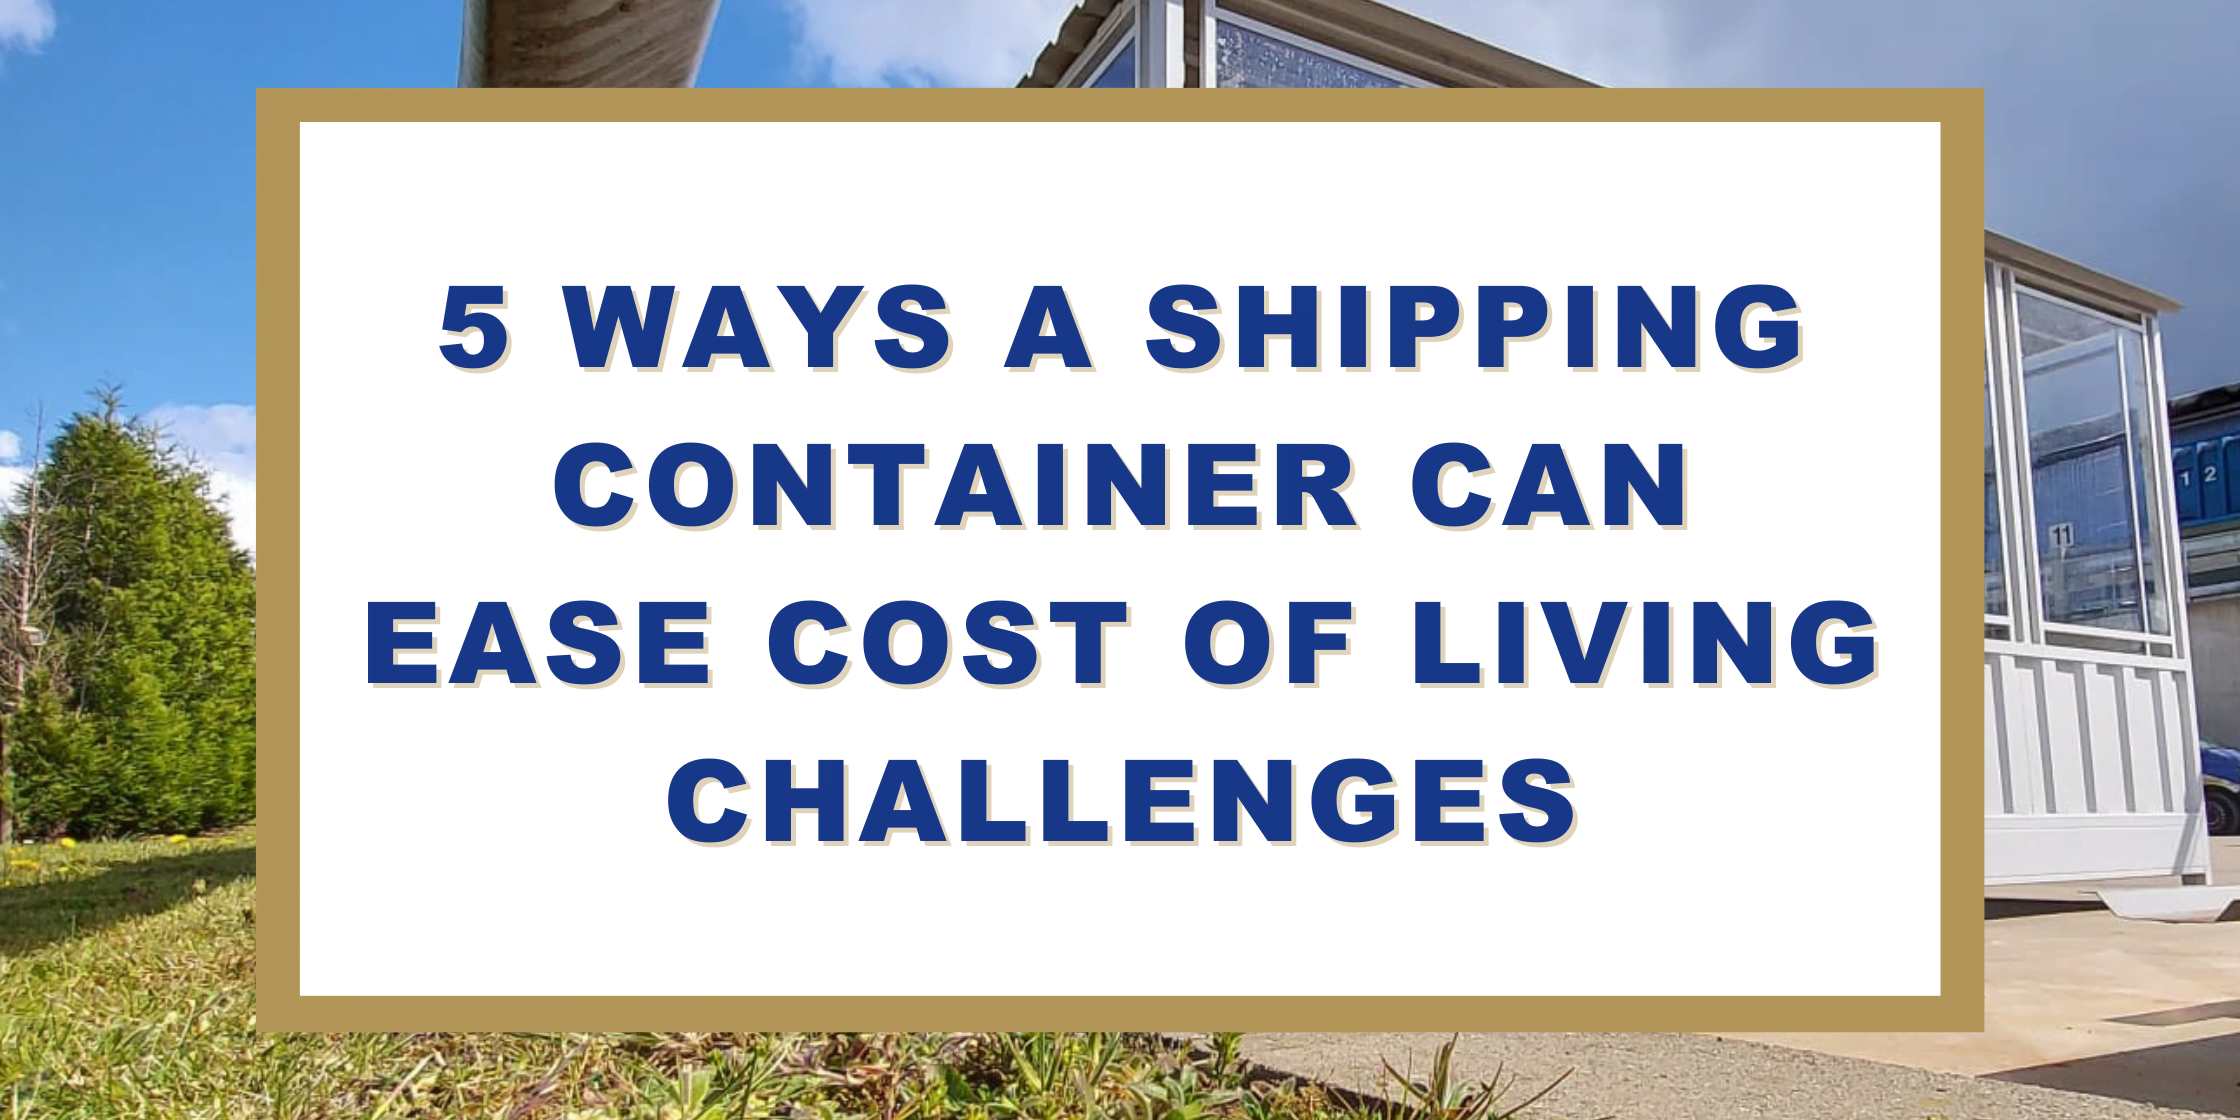 5 Ways a Shipping Container Can Ease the Cost of Living Challenges